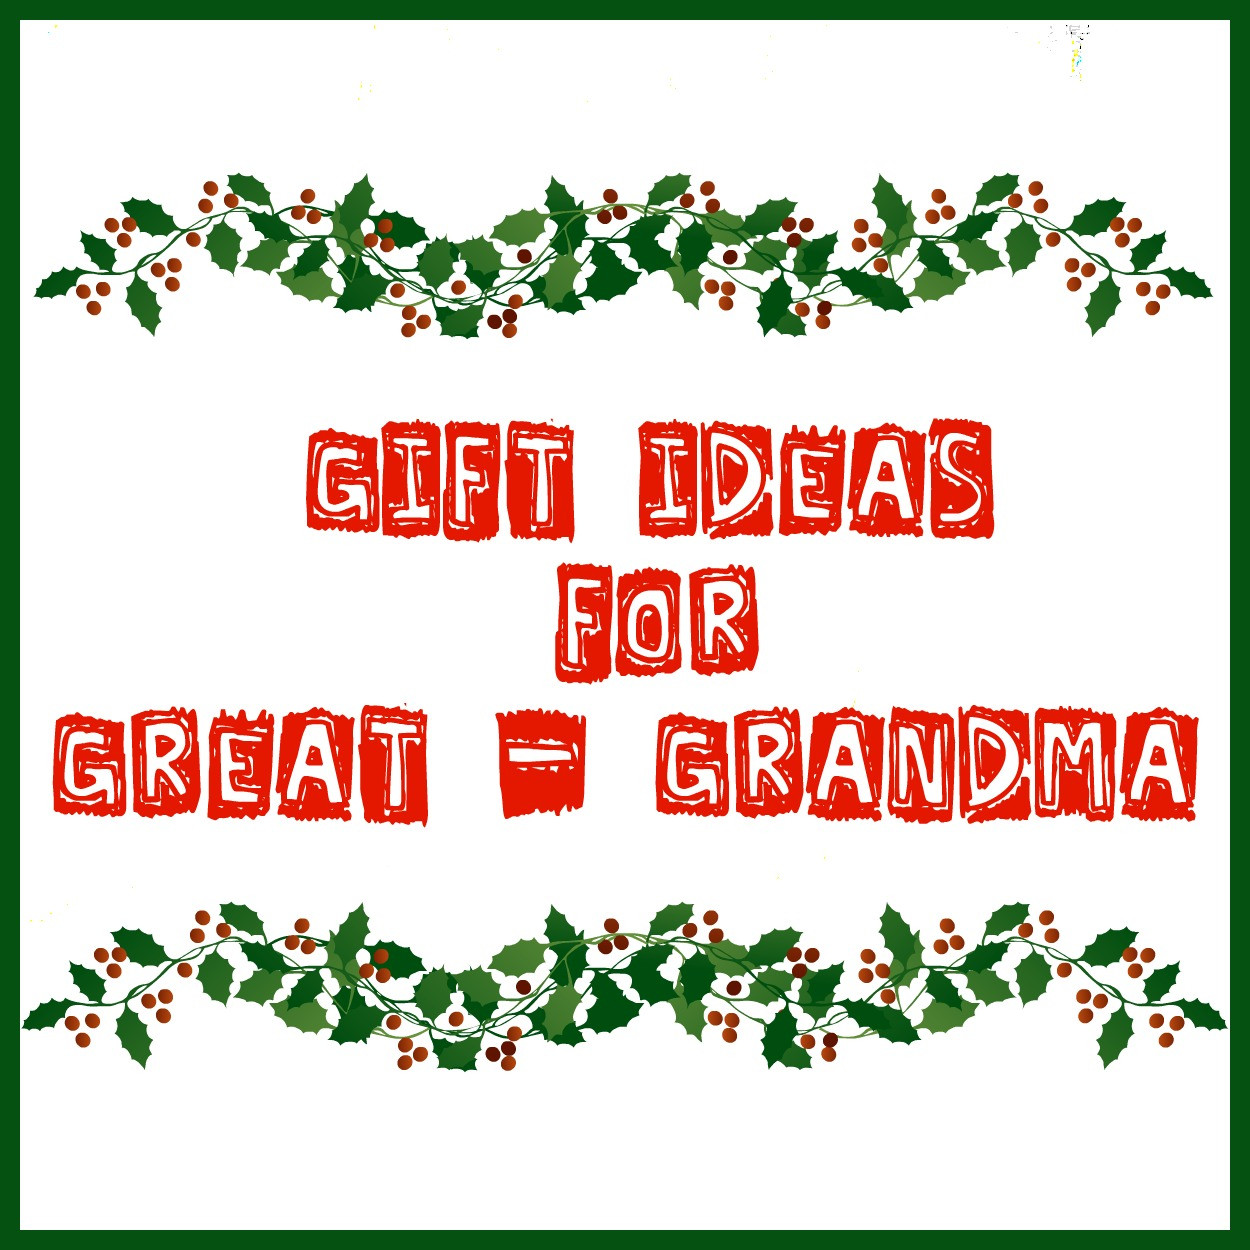 Great Grandmother Gift Ideas
 The Bean Sprout Notes Gift Ideas for Great Grandma